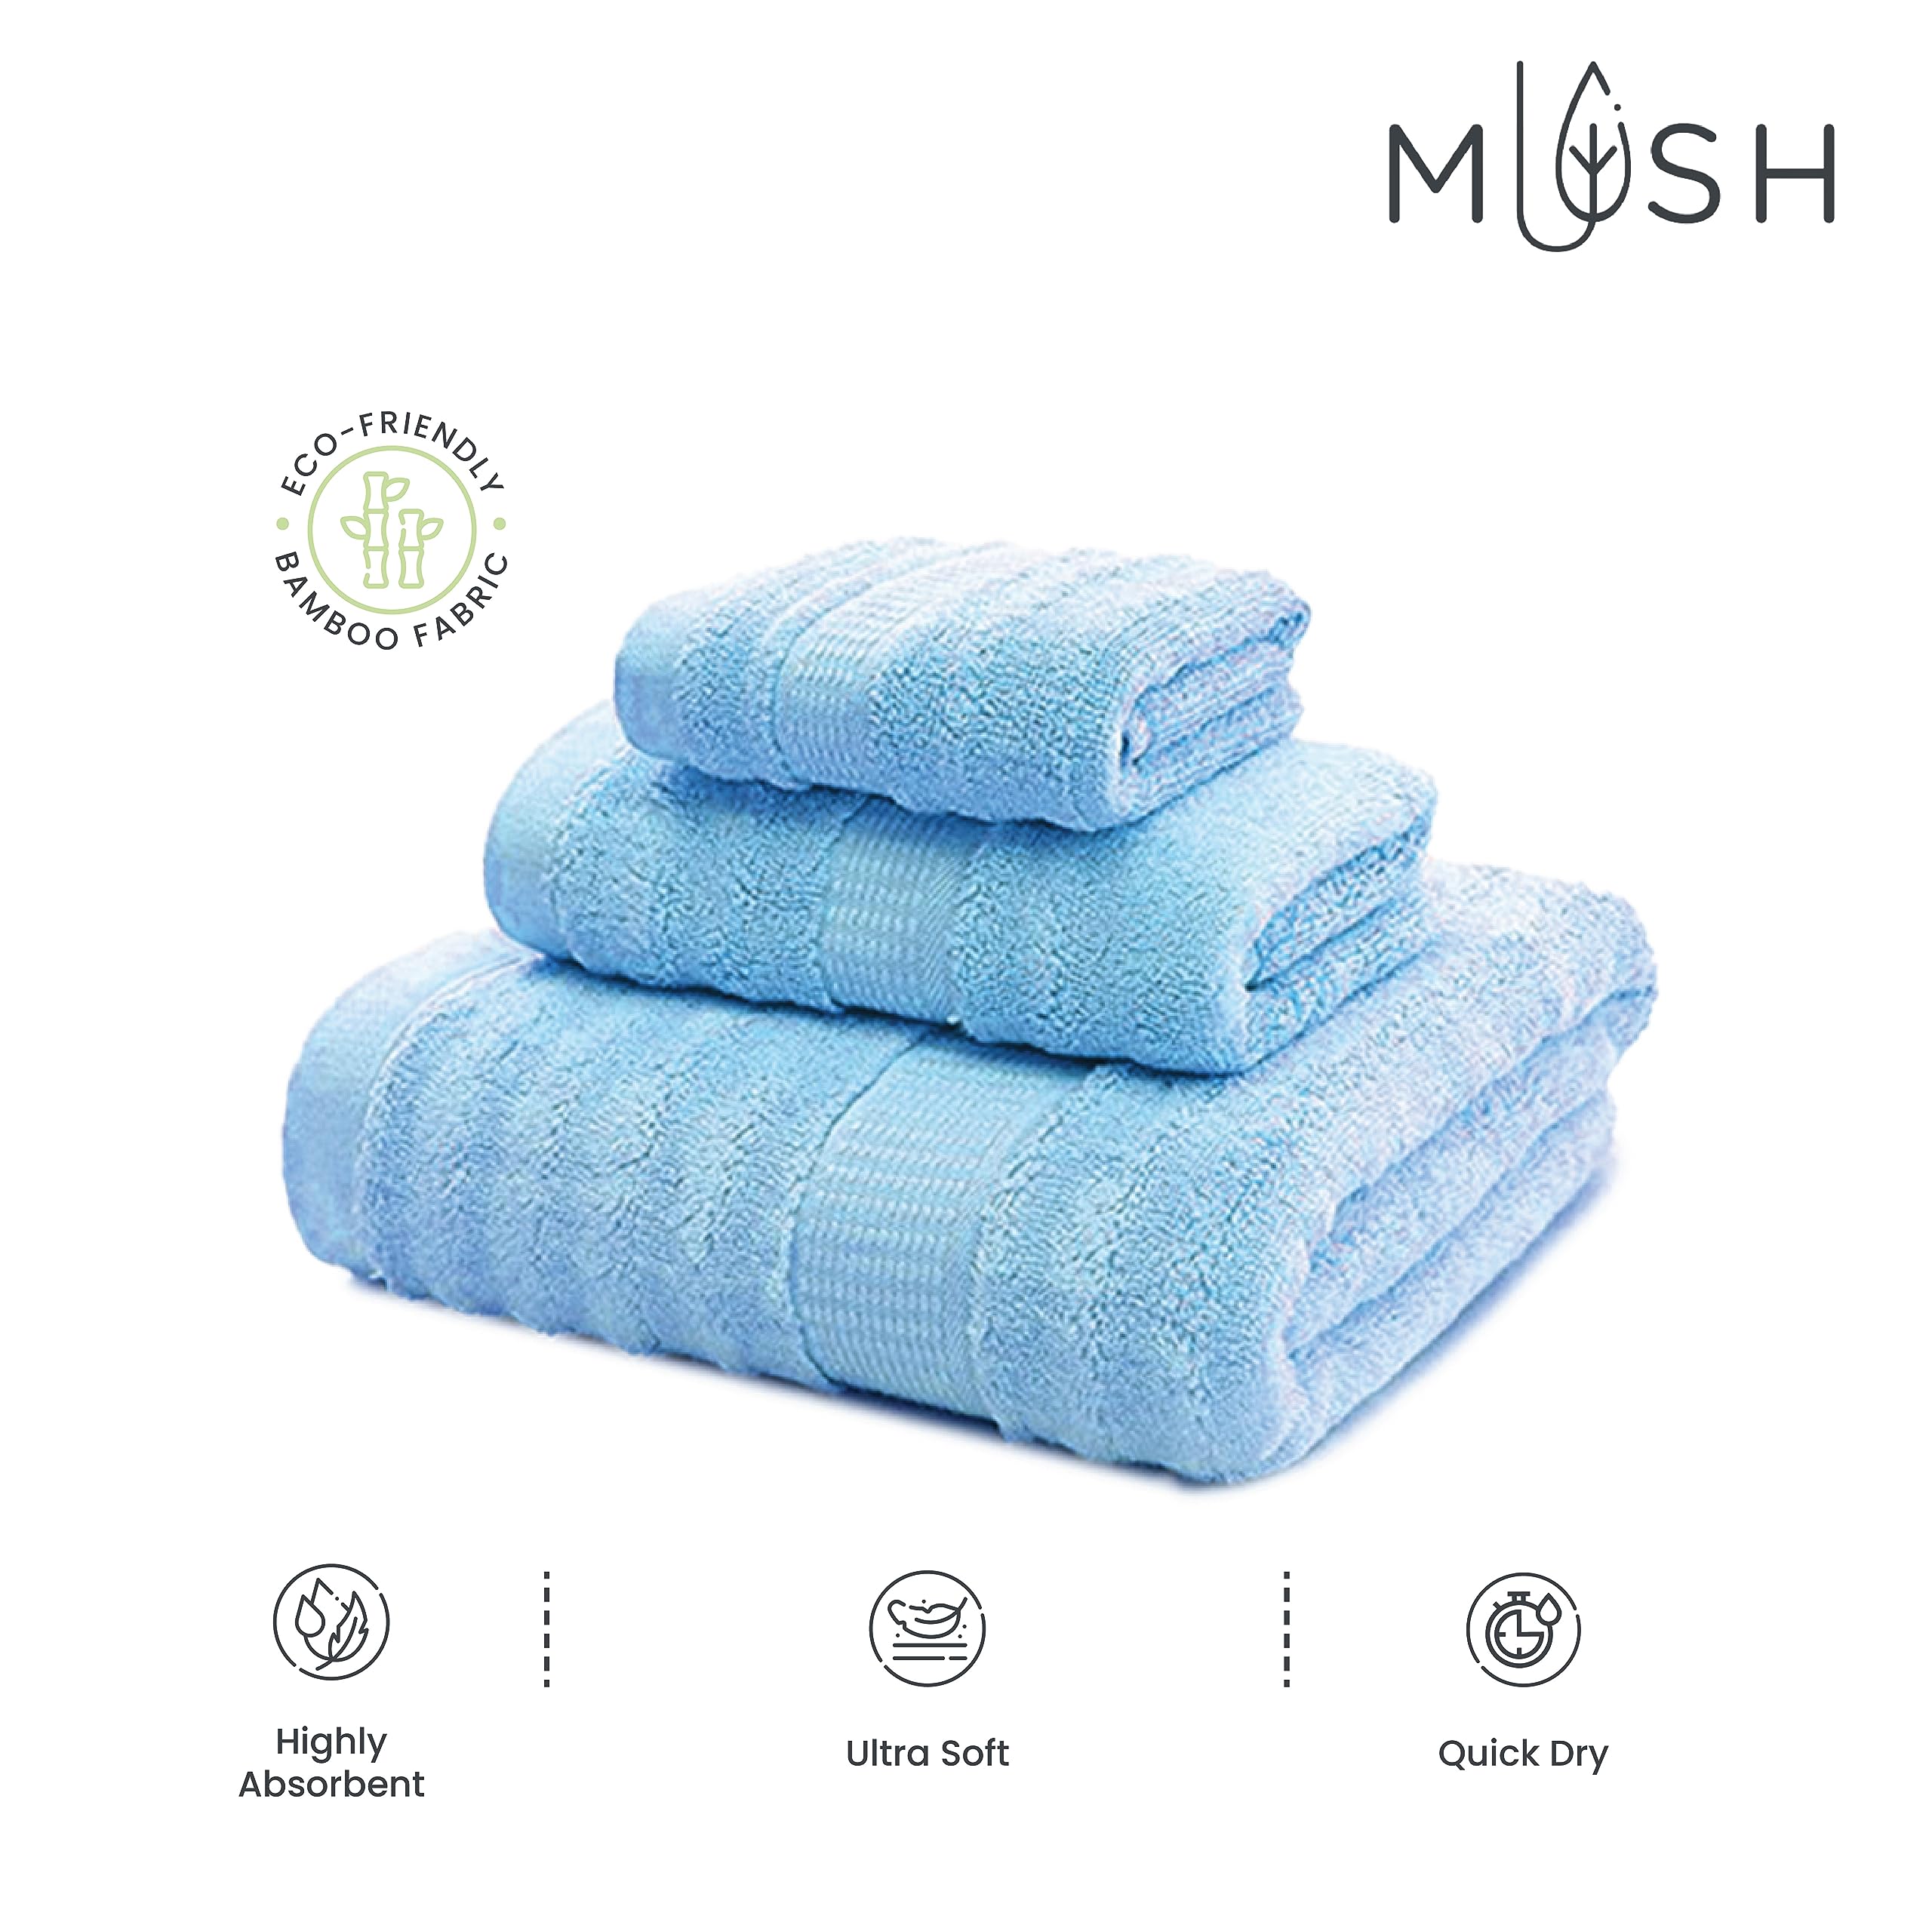 Mush Bamboo Luxurious 3 PieceTowels Set | Ultra Soft, Absorbent and Antimicrobial (Bath Towel, Hand Towel and Face Towel) Perfect as a Diwali/House Warming (Gift Box : Sky Blue)